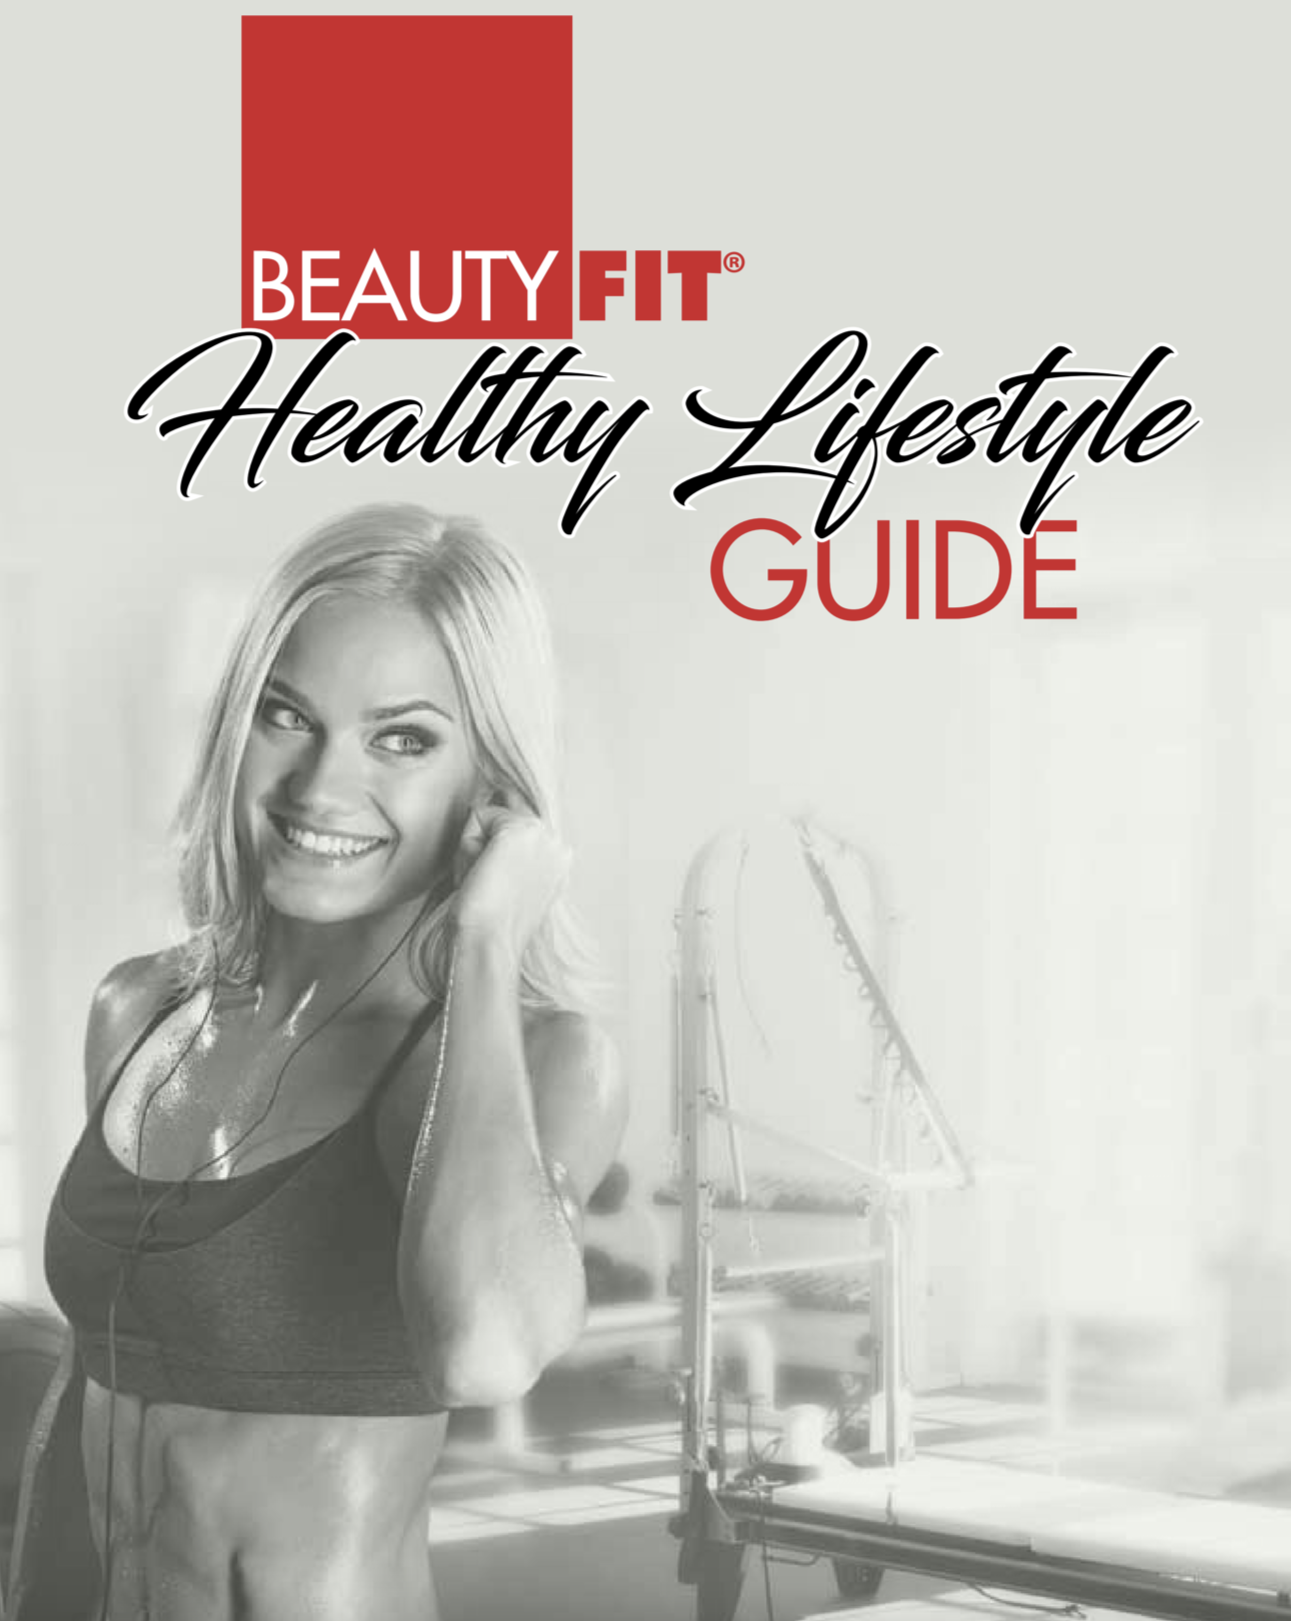 Healthy LifeStyle Guide - Free W/ Purchase!